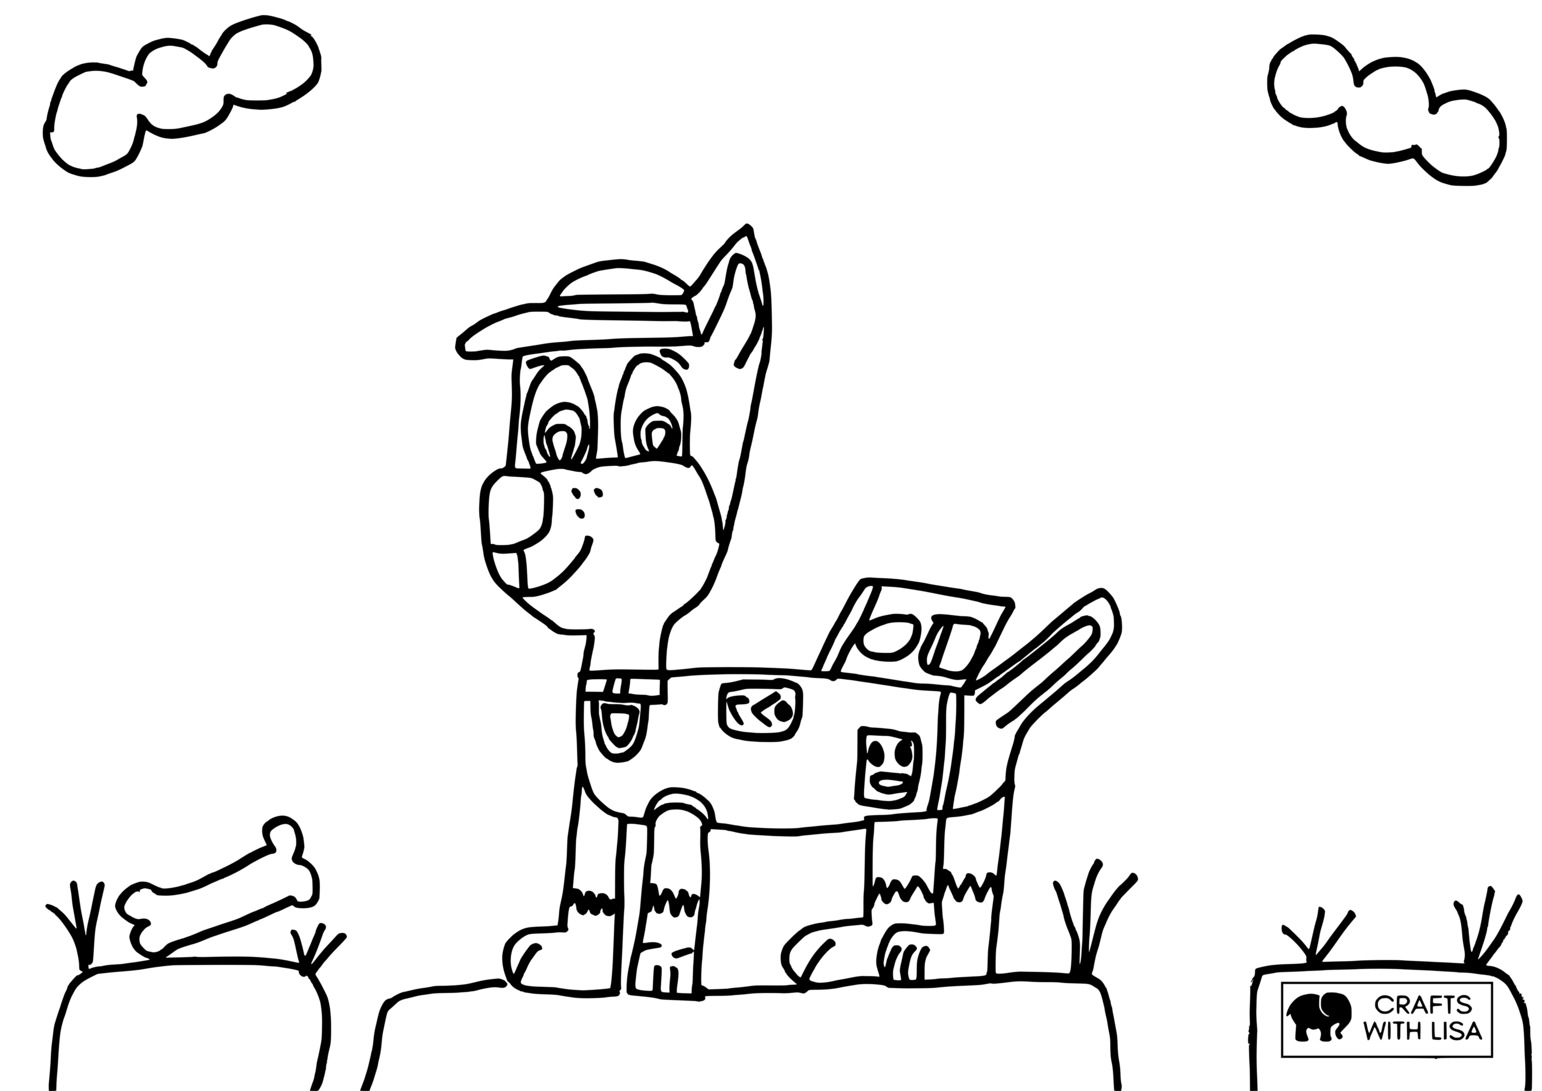 Chase paw patrol coloring page